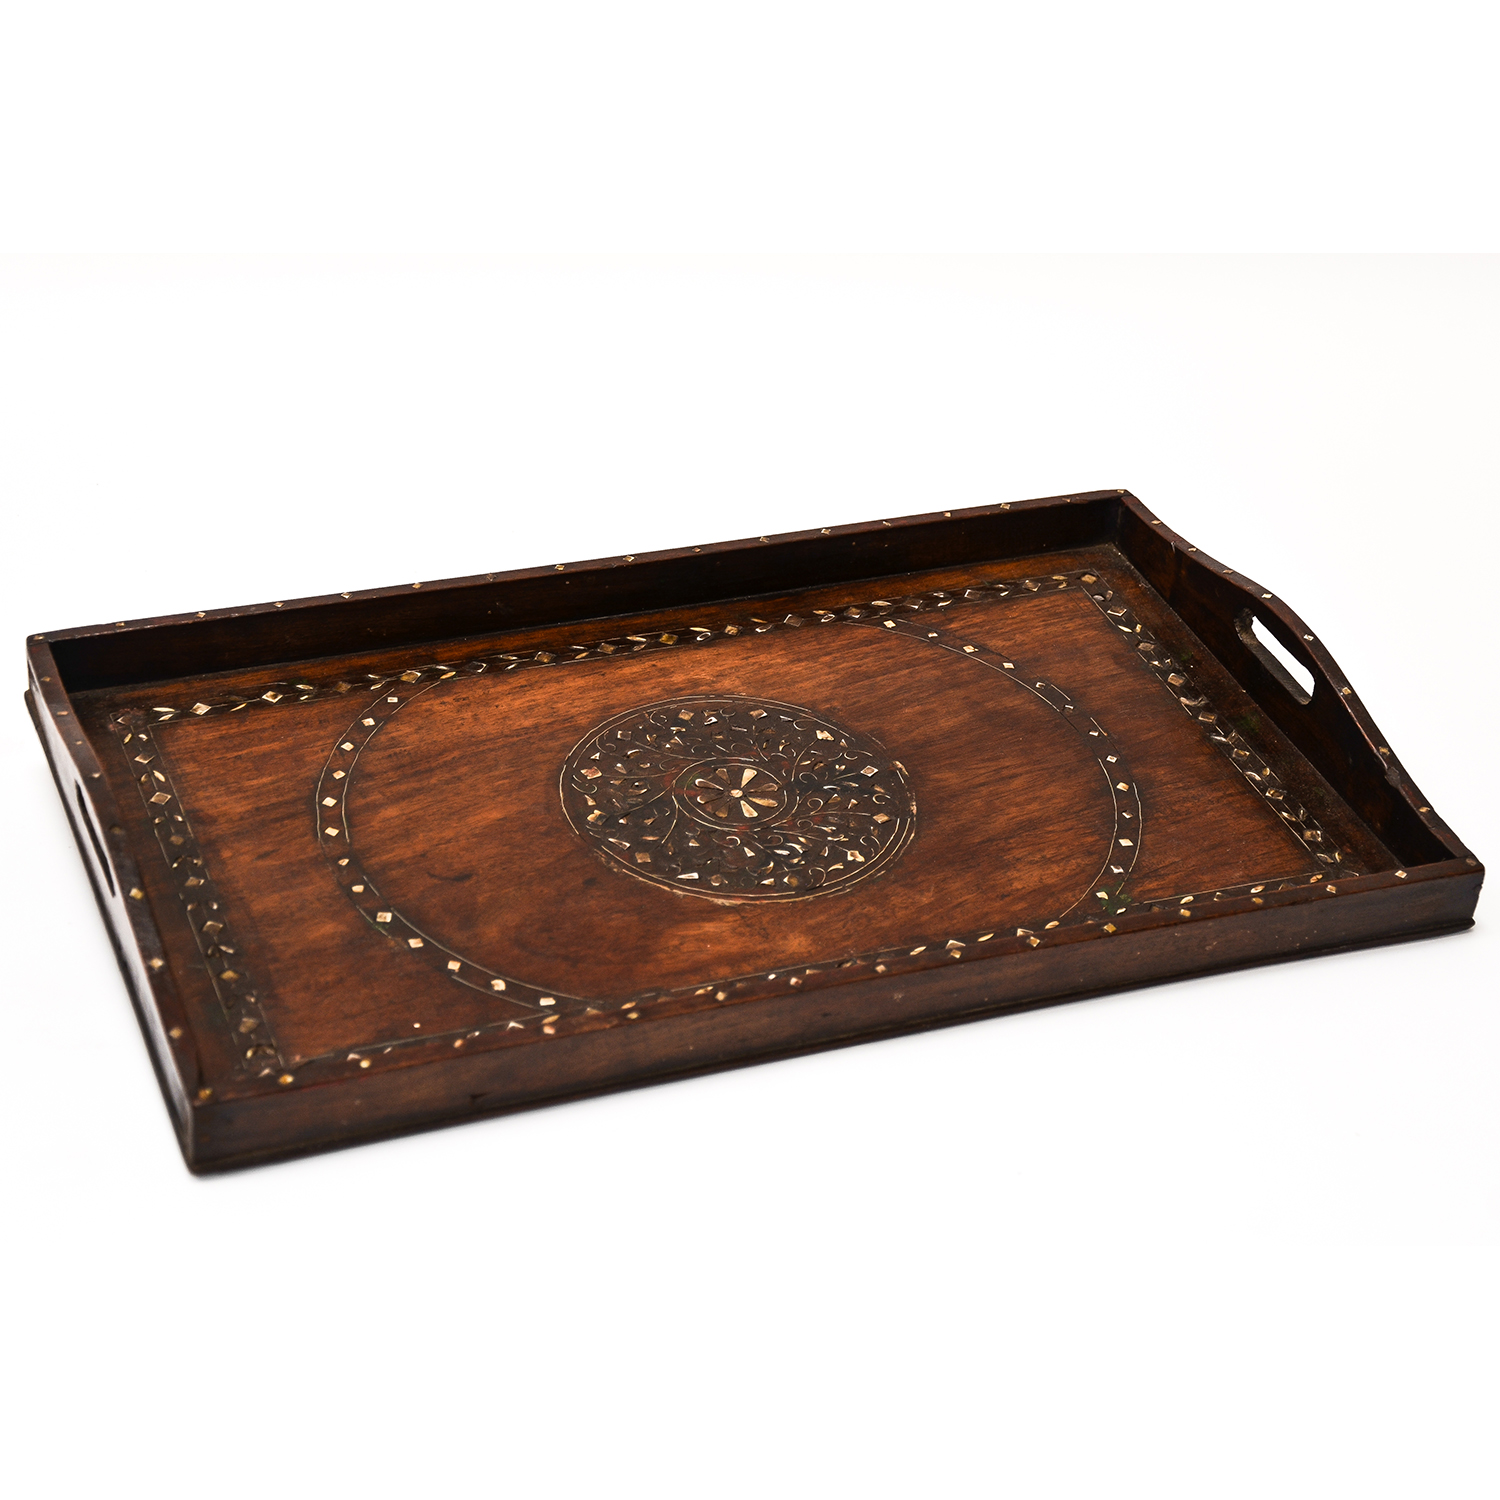 Allan KnightA-LIST OUTLET | Furnishings | Old Indian Wooden Service ...